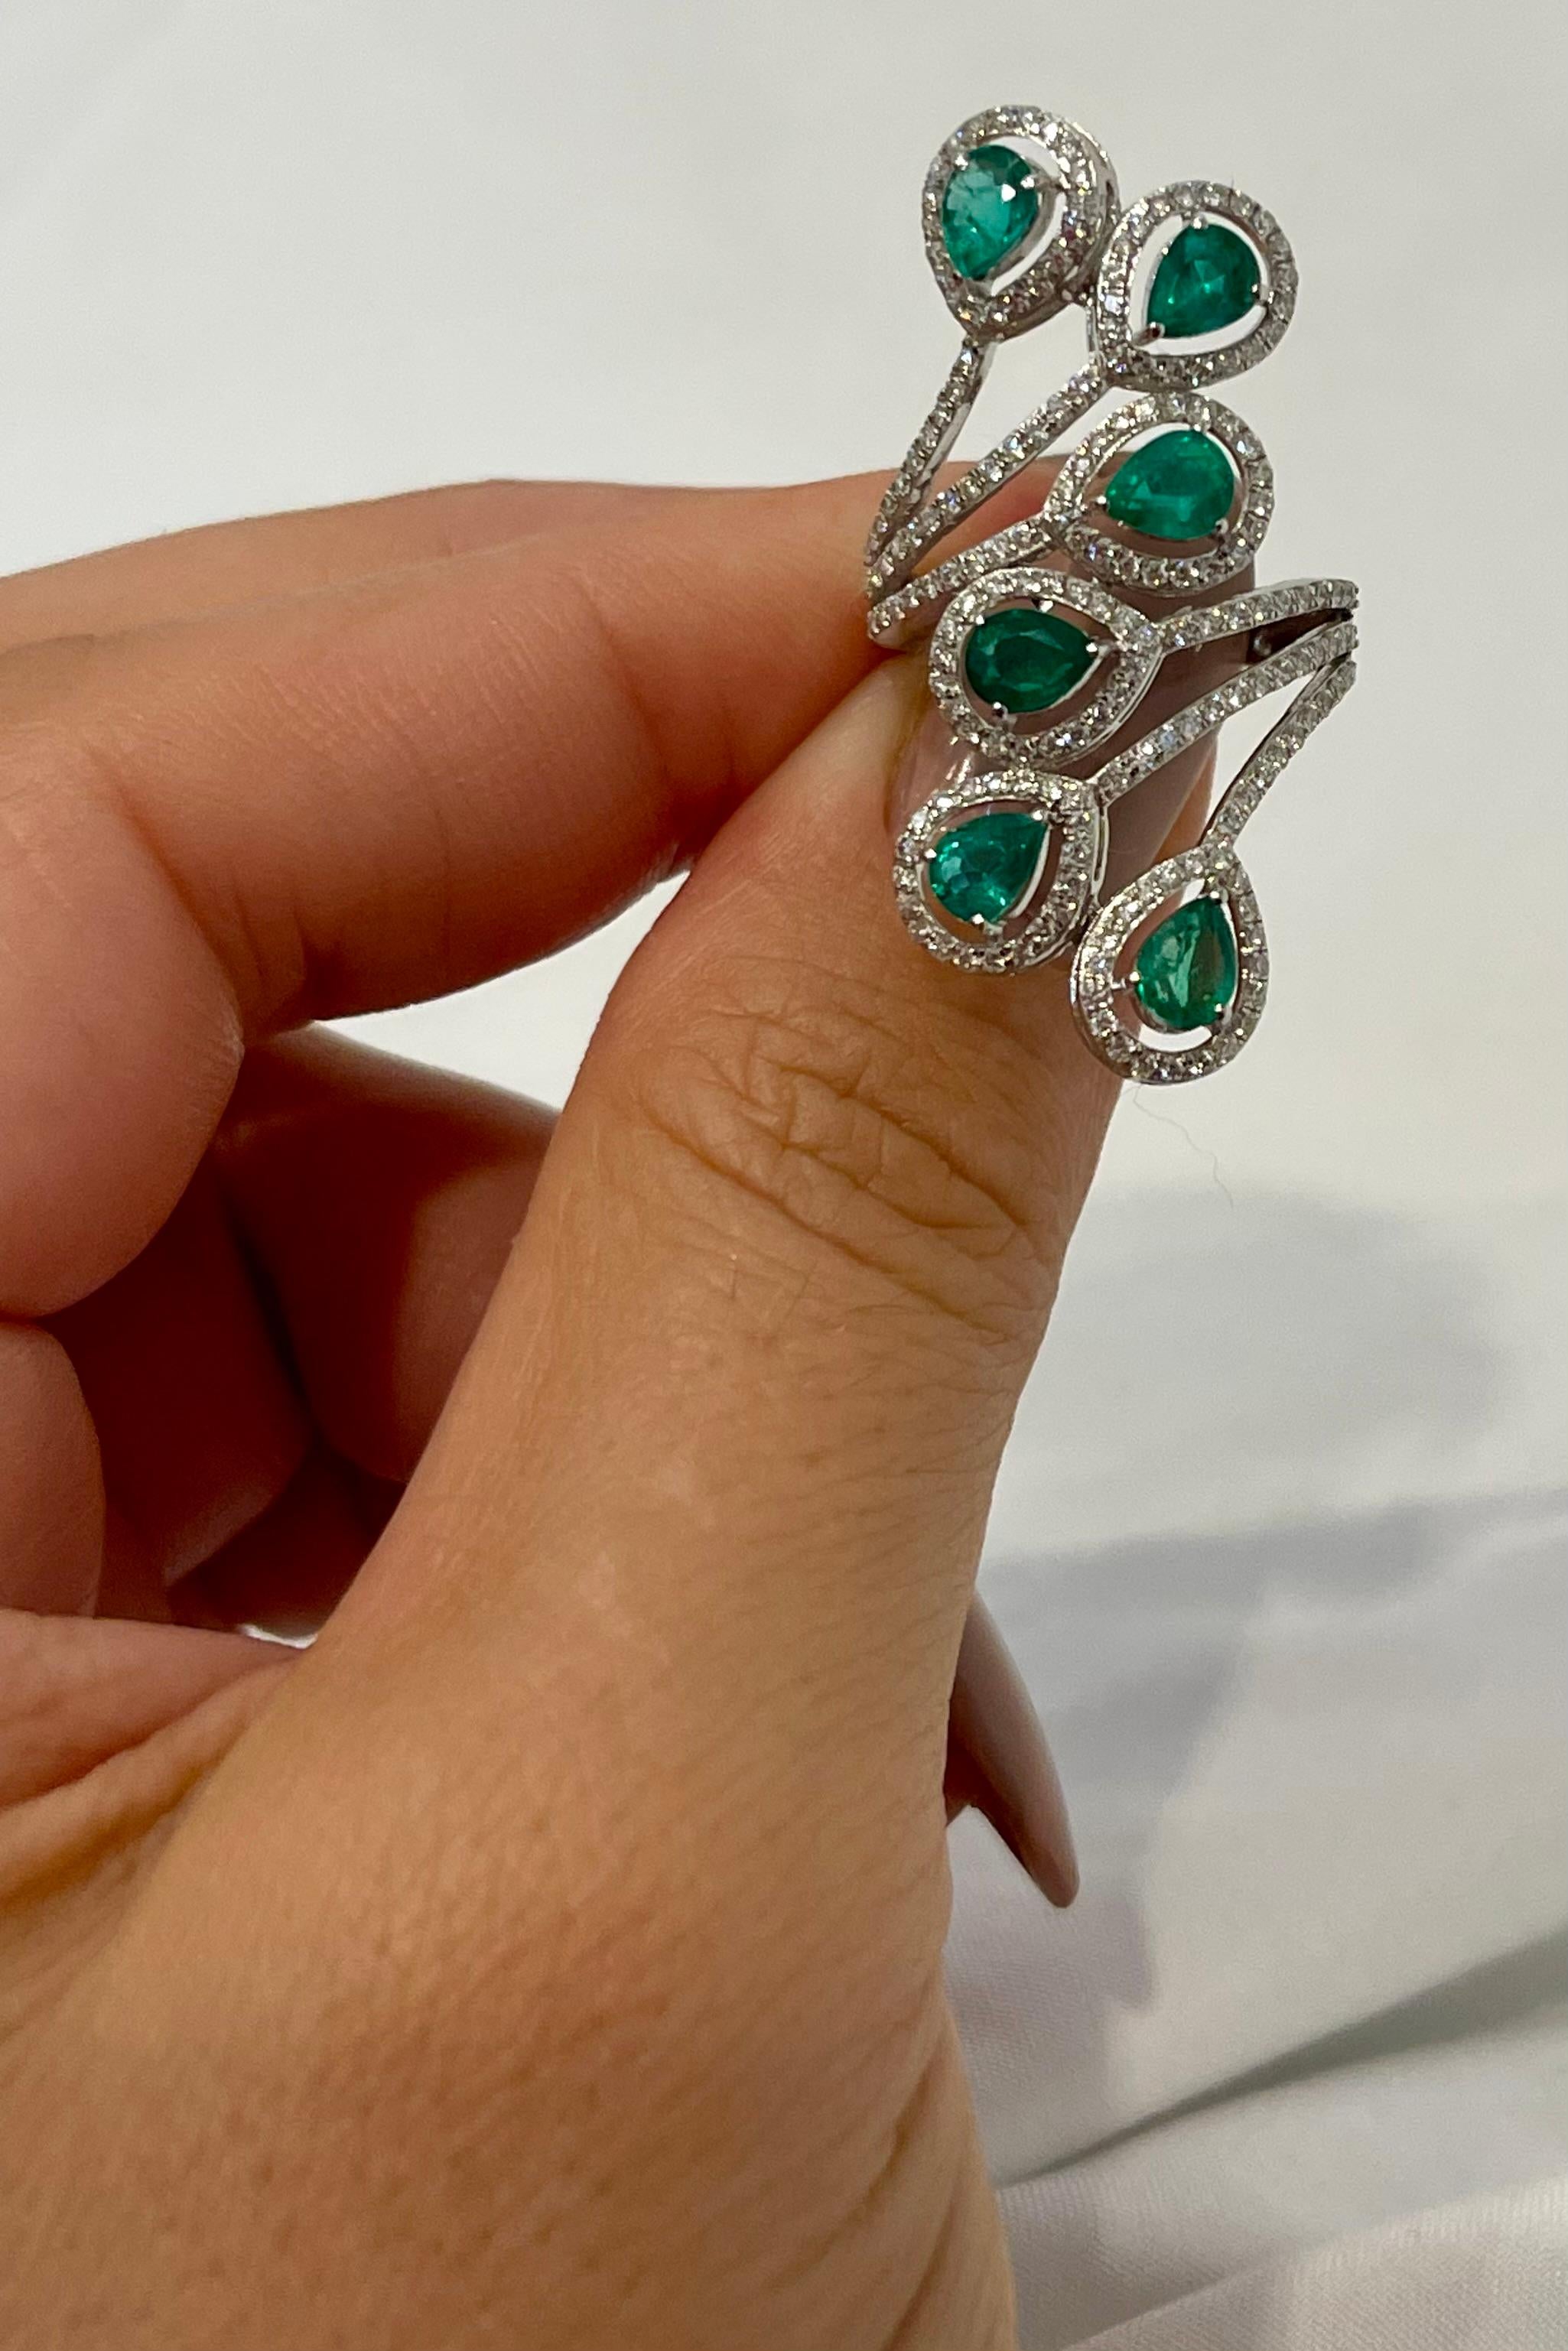 3 Ct Natural  Zambian Emeralds and 1.2 Ct Diamond Ring in 14 karat White Gold For Sale 1